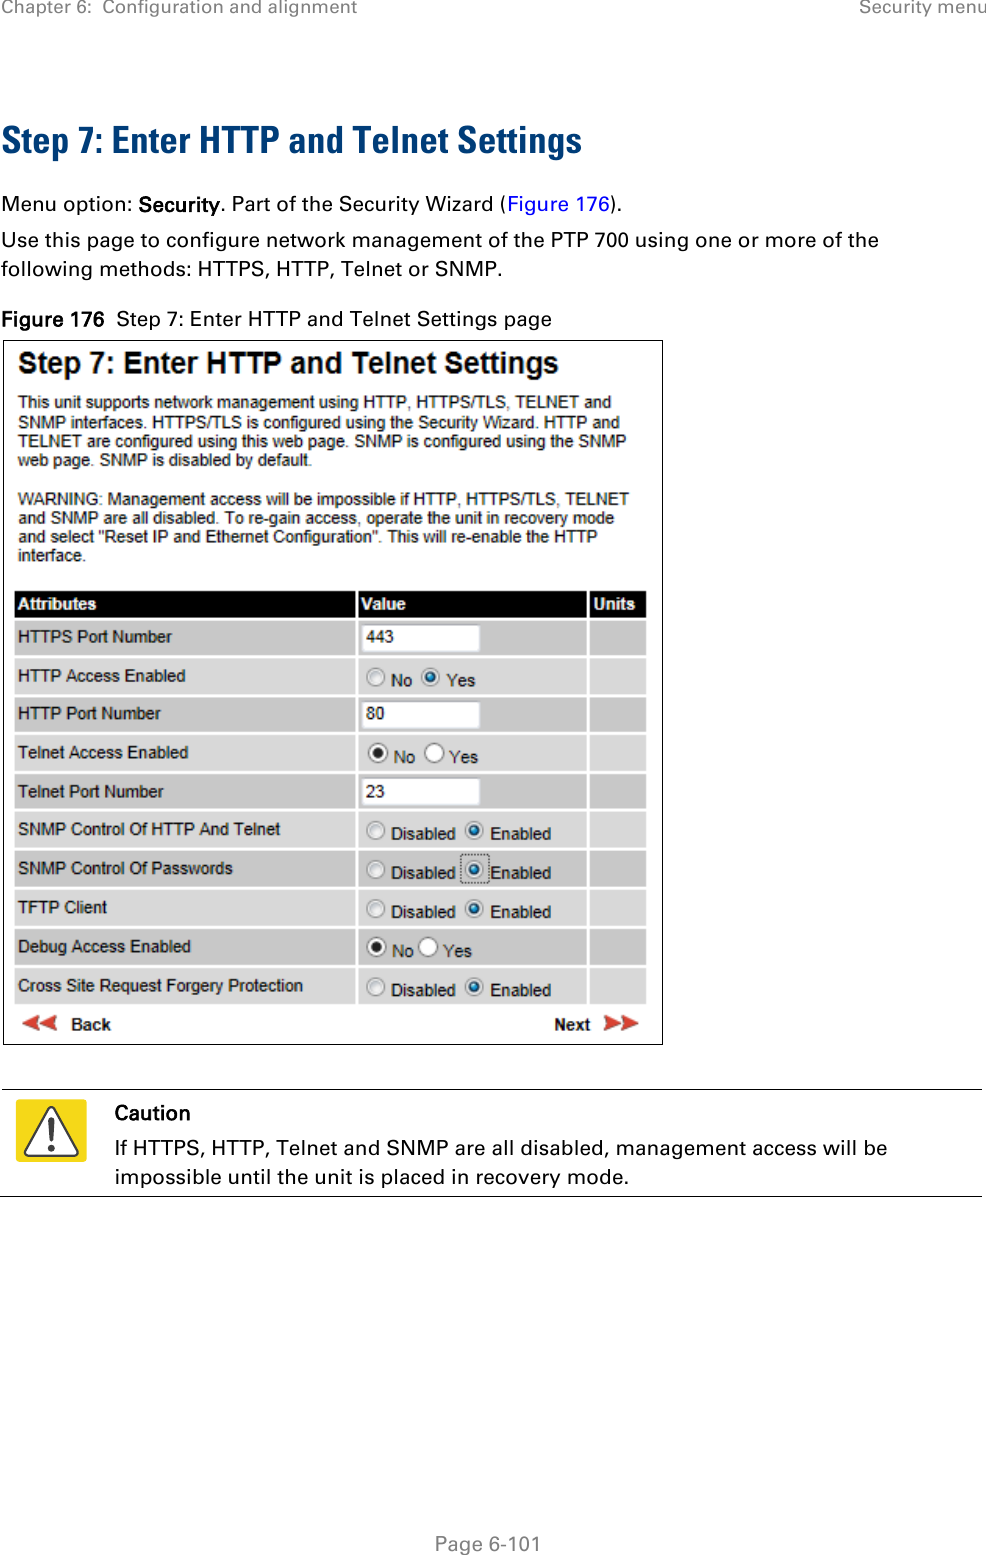 Chapter 6:  Configuration and alignment Security menu  Step 7: Enter HTTP and Telnet Settings Menu option: Security. Part of the Security Wizard (Figure 176). Use this page to configure network management of the PTP 700 using one or more of the following methods: HTTPS, HTTP, Telnet or SNMP. Figure 176  Step 7: Enter HTTP and Telnet Settings page    Caution If HTTPS, HTTP, Telnet and SNMP are all disabled, management access will be impossible until the unit is placed in recovery mode.   Page 6-101 